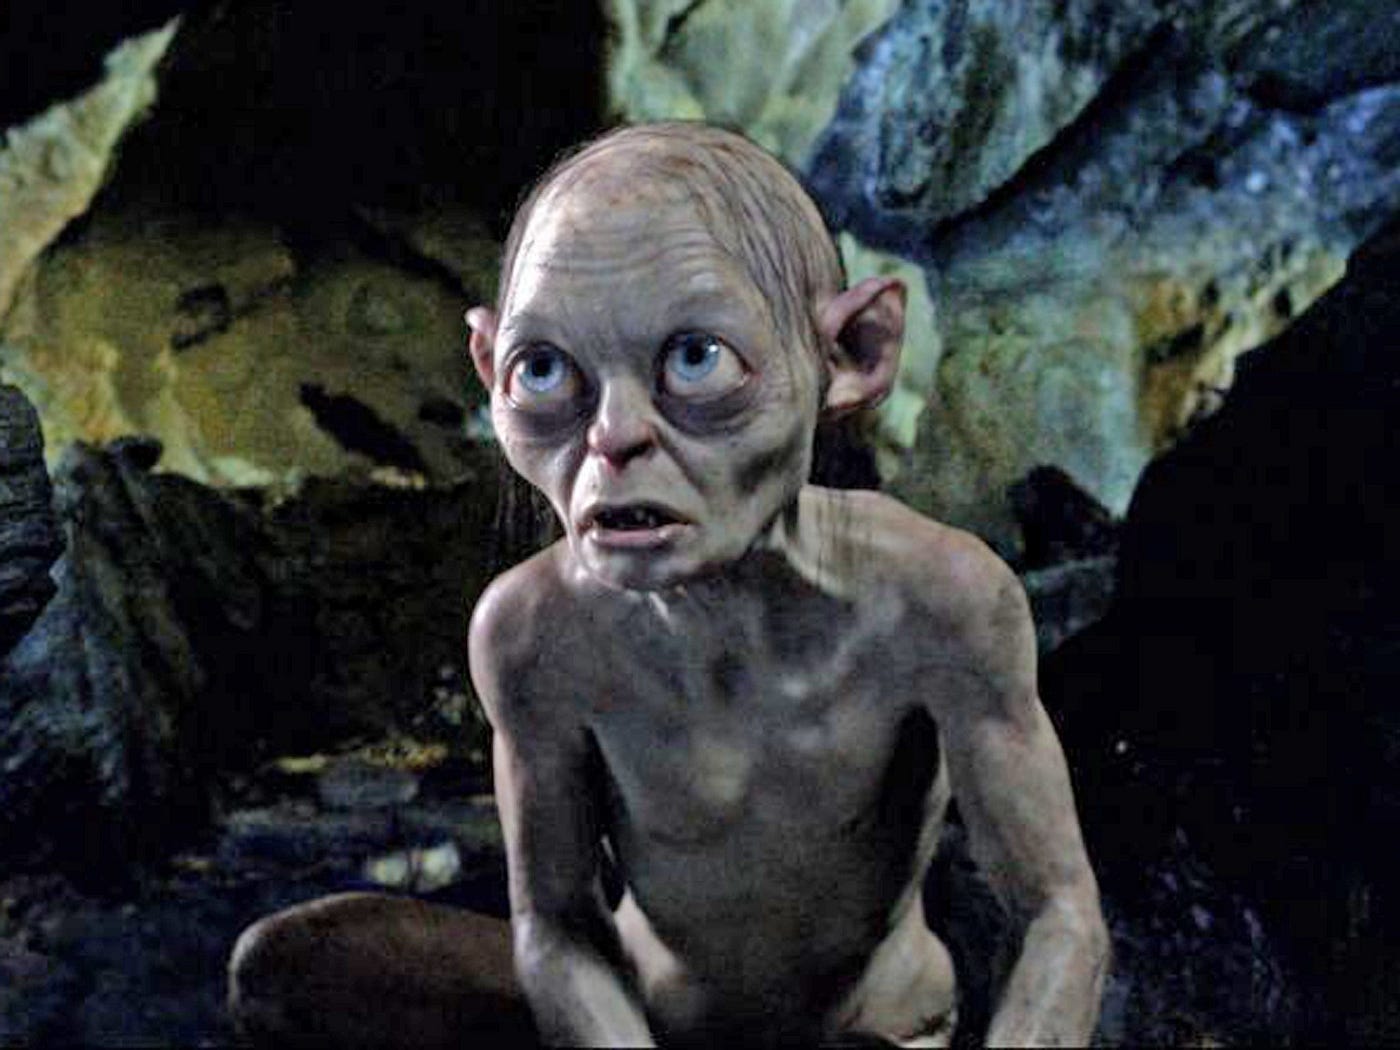 The Hobbit: Bilbo & Gollum's Riddles Were Inspired by Norse Mythology